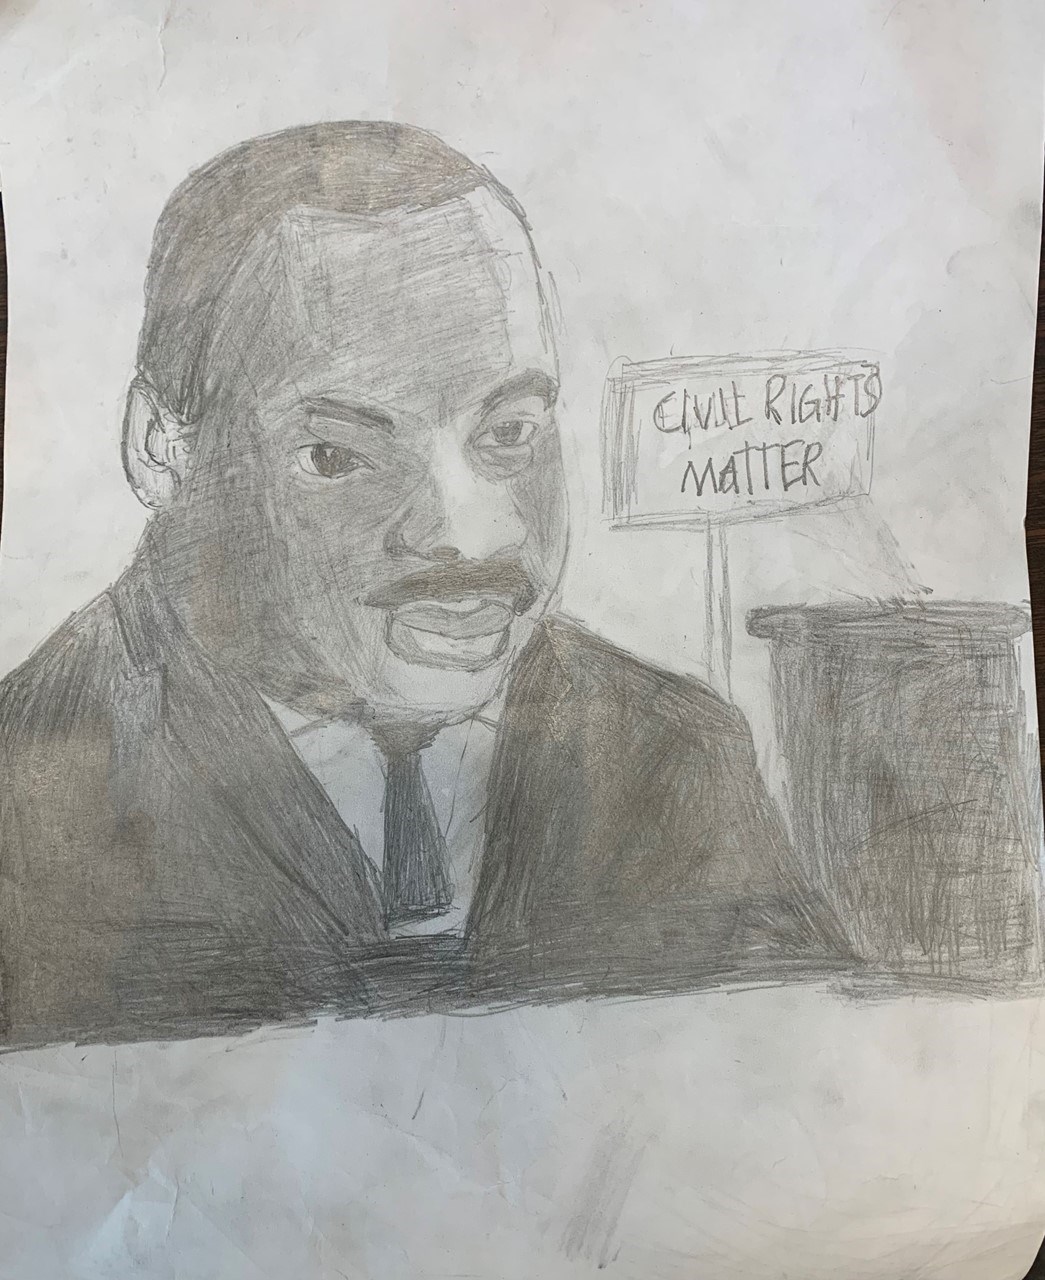 Picture of Martin Luther King- Civil Rights Matter